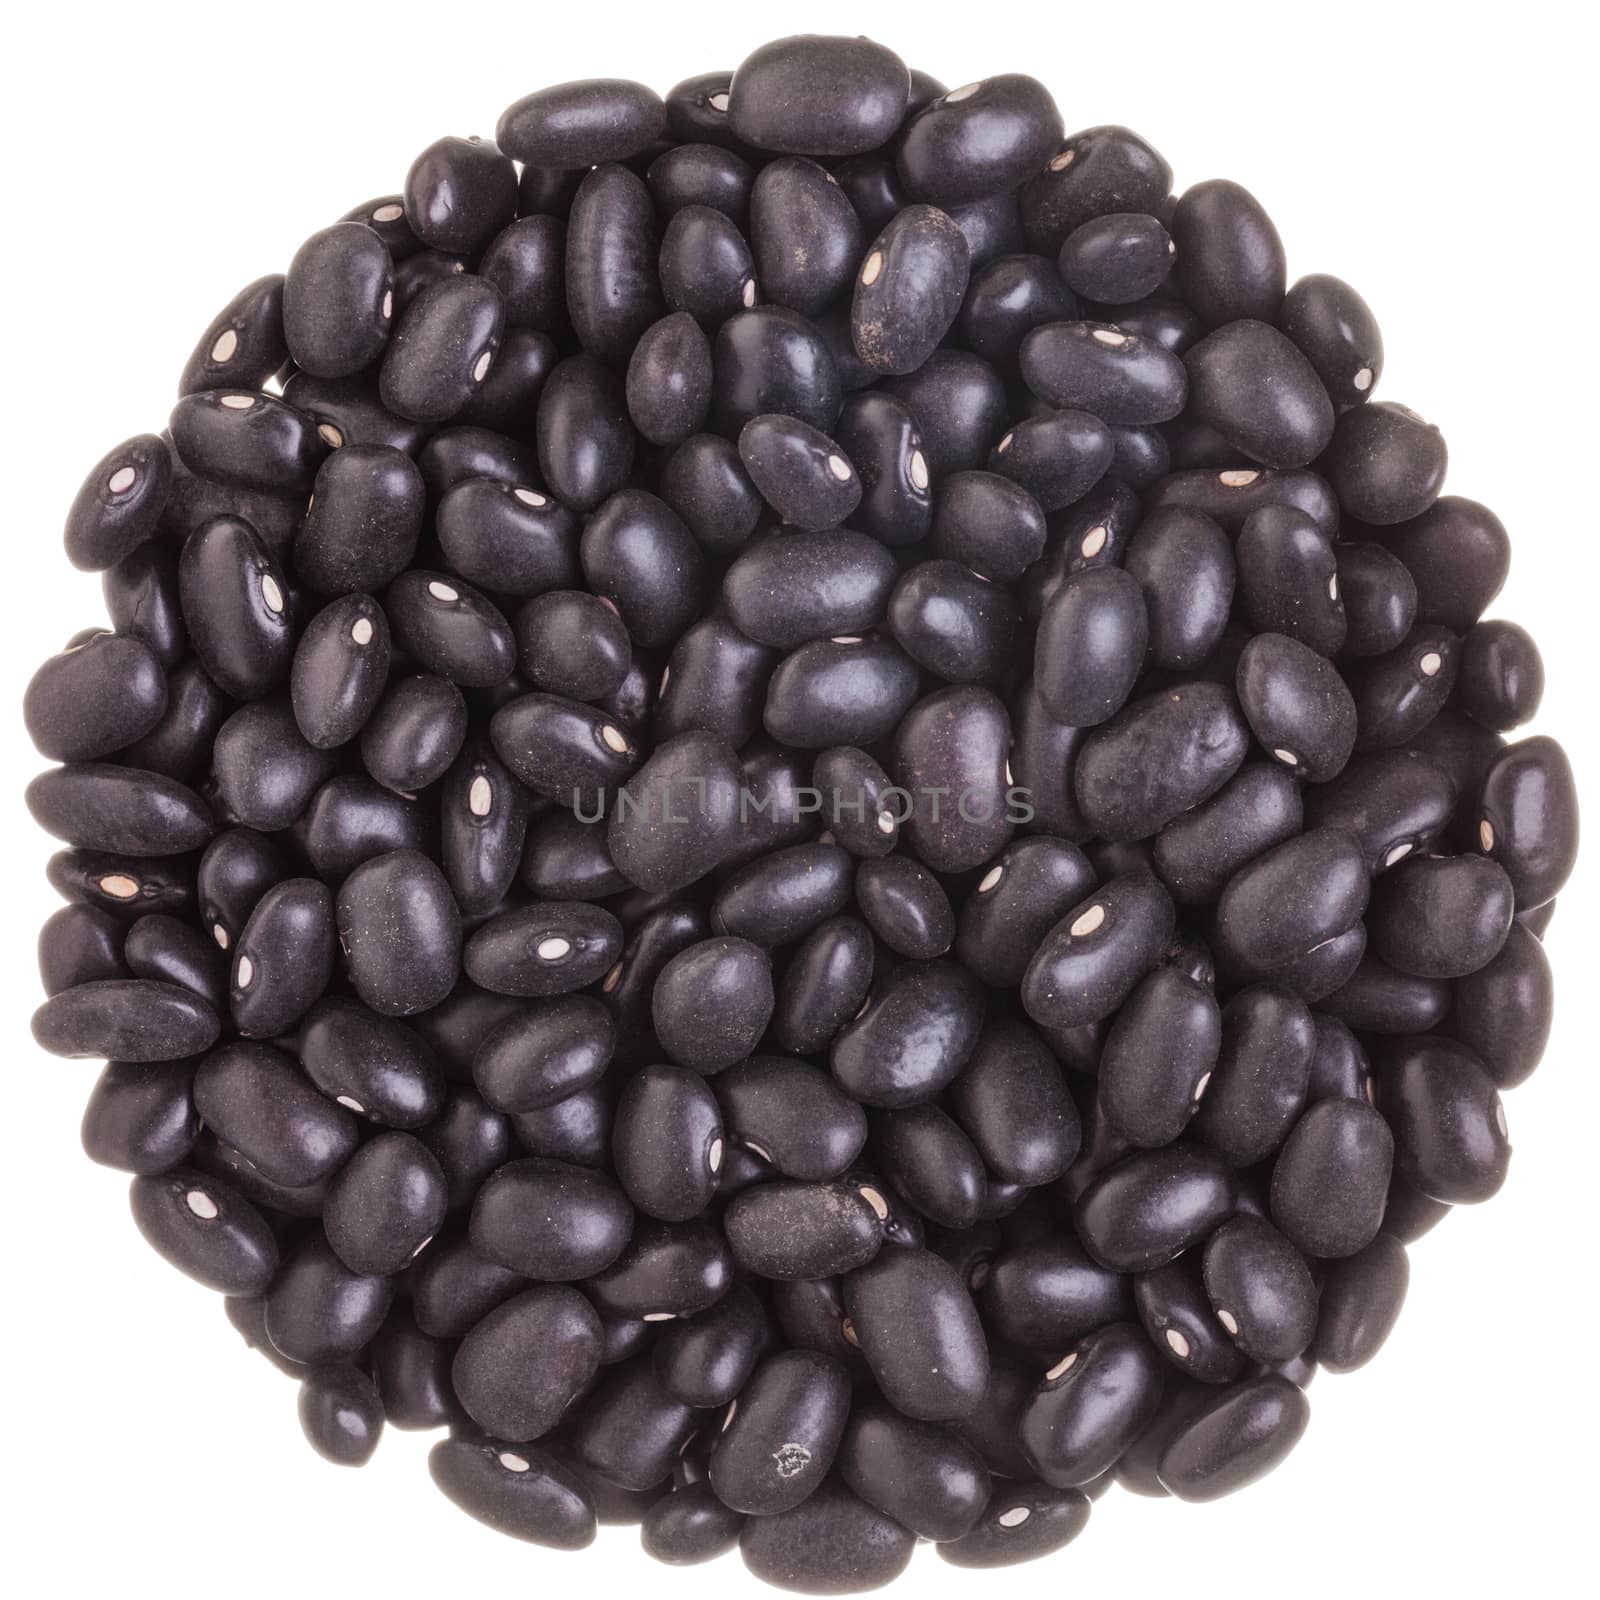 Perfect Circle texture of Black Beans by aetb